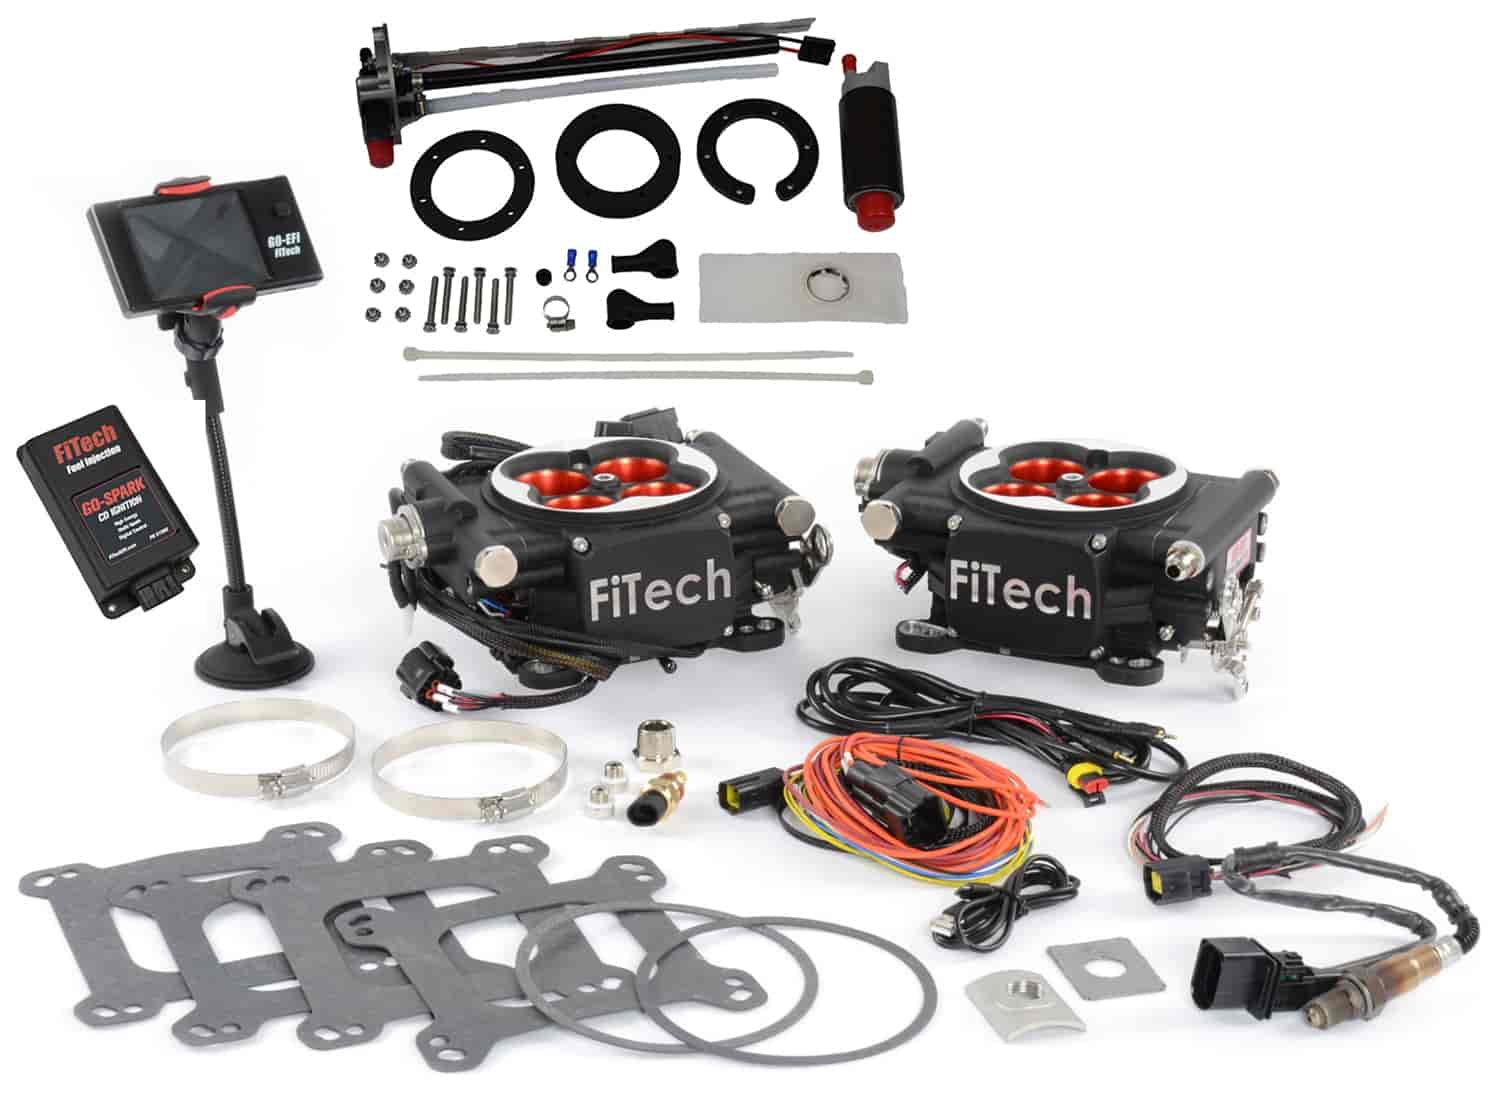 FUEL INJECTION MASTER KIT